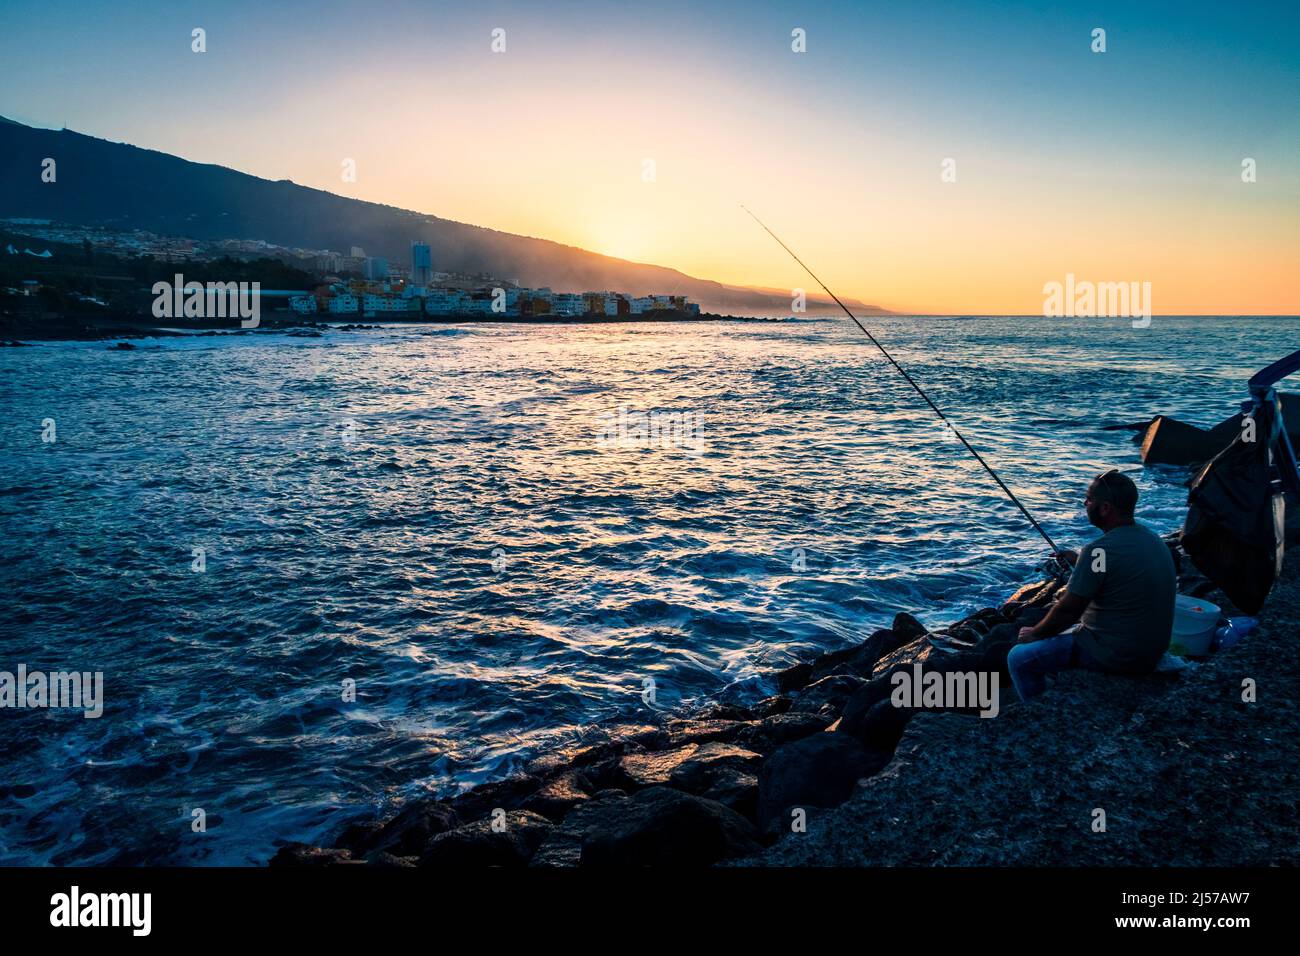 Fishing off the Atardecer during sunset on Playa Jardin in the city of Puerto de la Cruz in the north of Tenerife Canary Islands Stock Photo